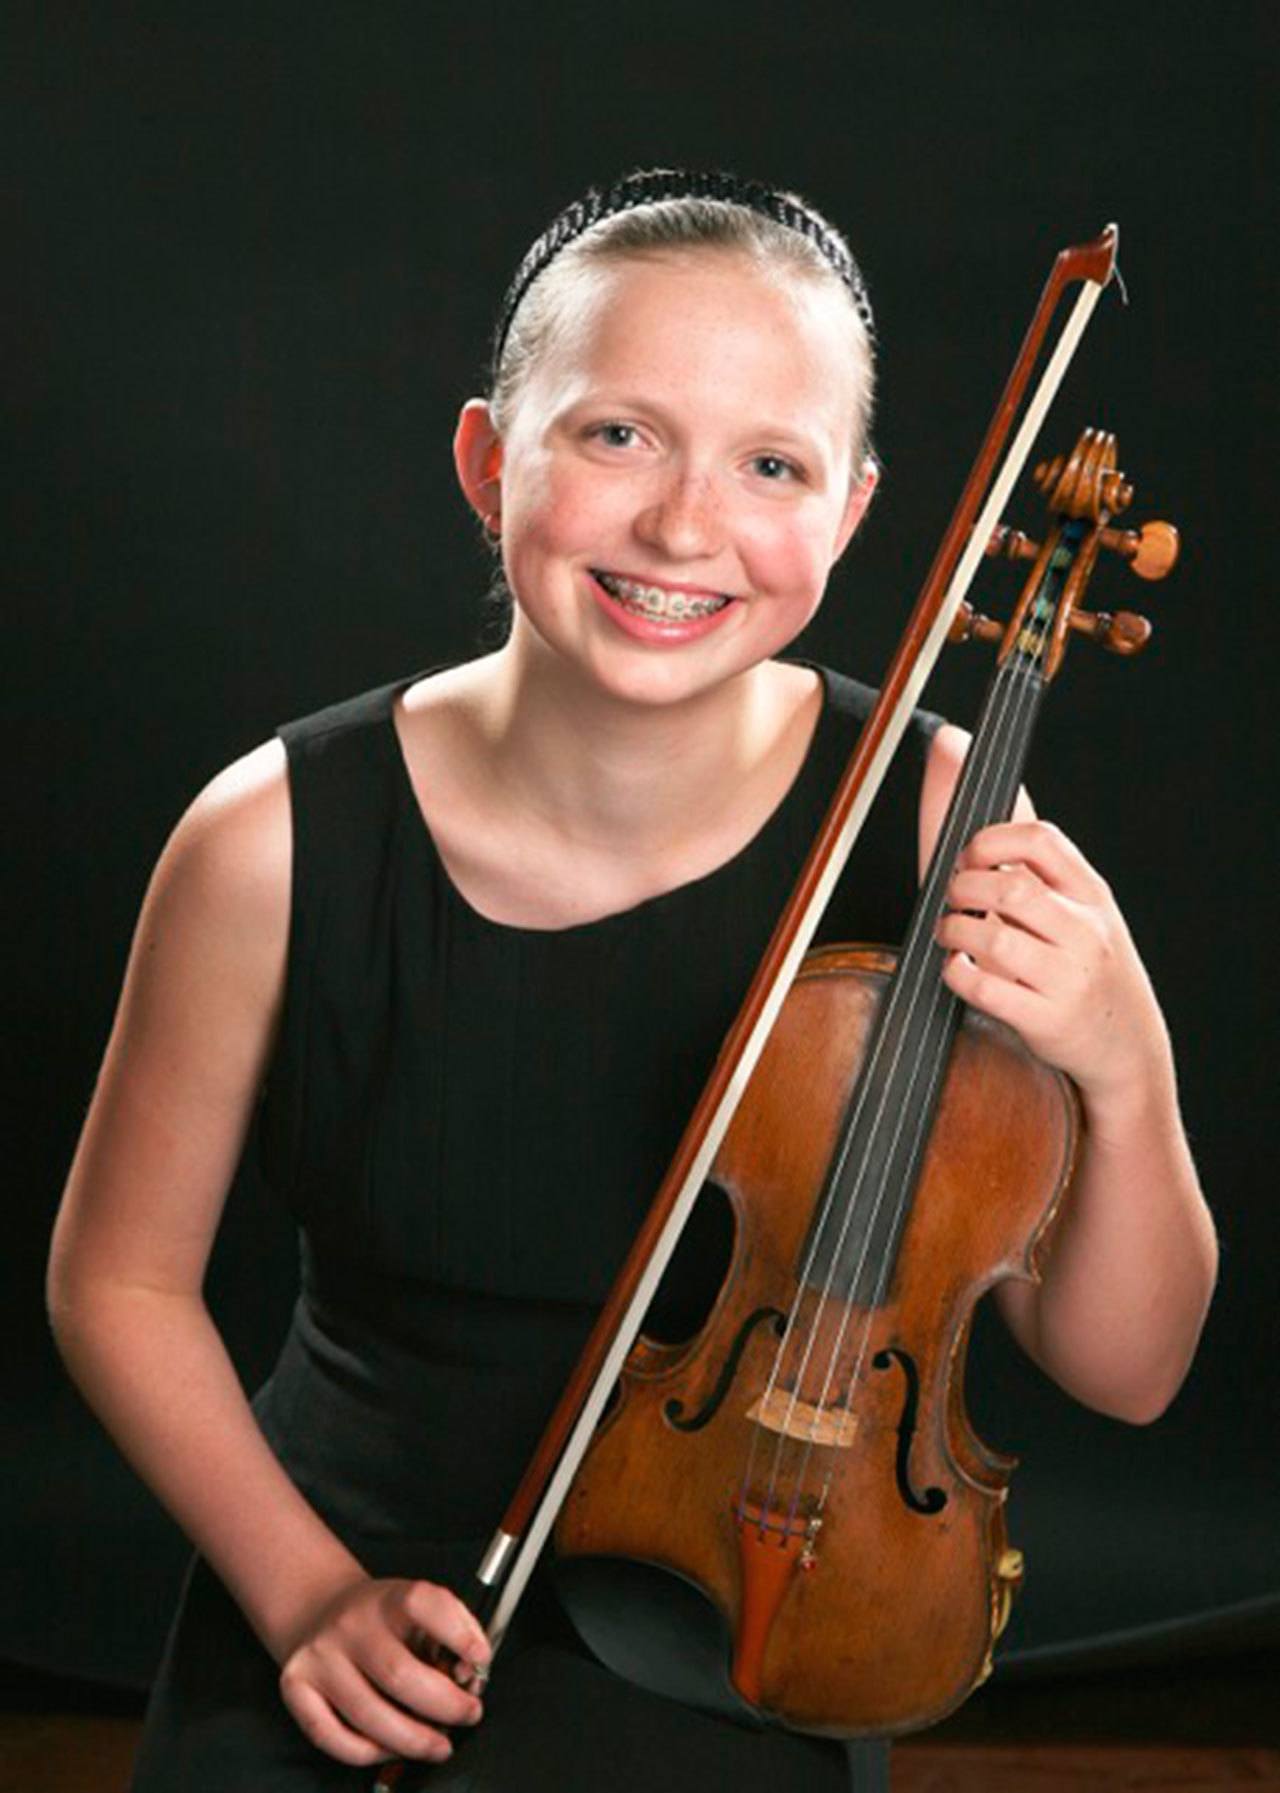 Yuen Lui Photography Studio photo                                Charlotte Marckx, a 14-year-old violinist from Bellevue, first-place 
winner of the Bainbridge Symphony Orchestra’s 2017 Young Artist Concerto Competition.